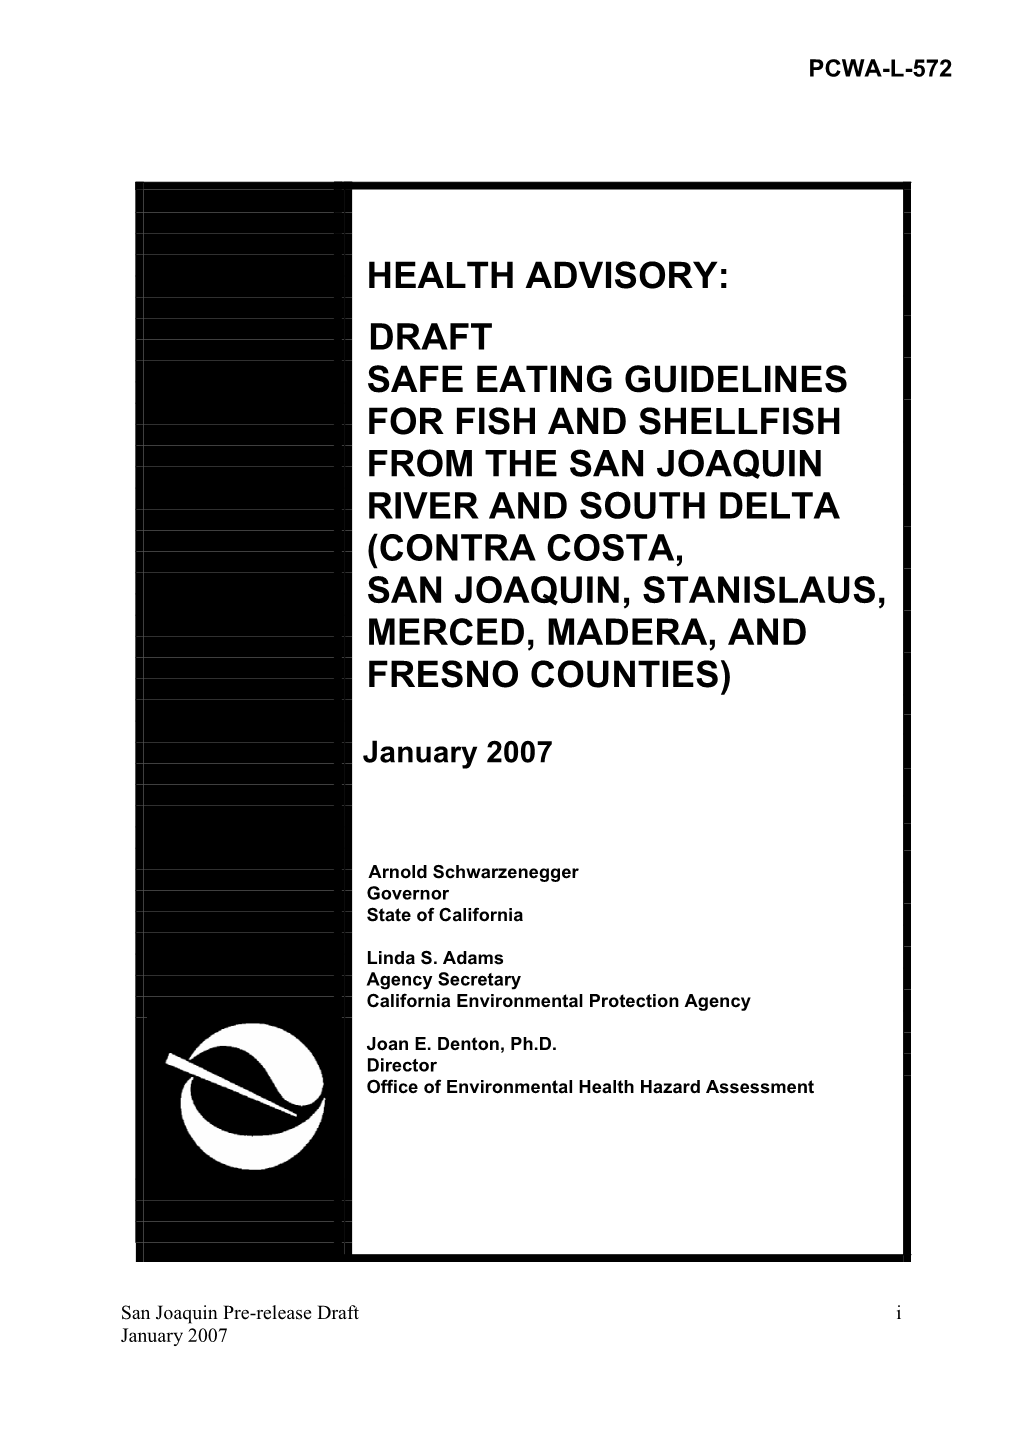 Draft Safe Eating Guidelines for Fish and Shellfish